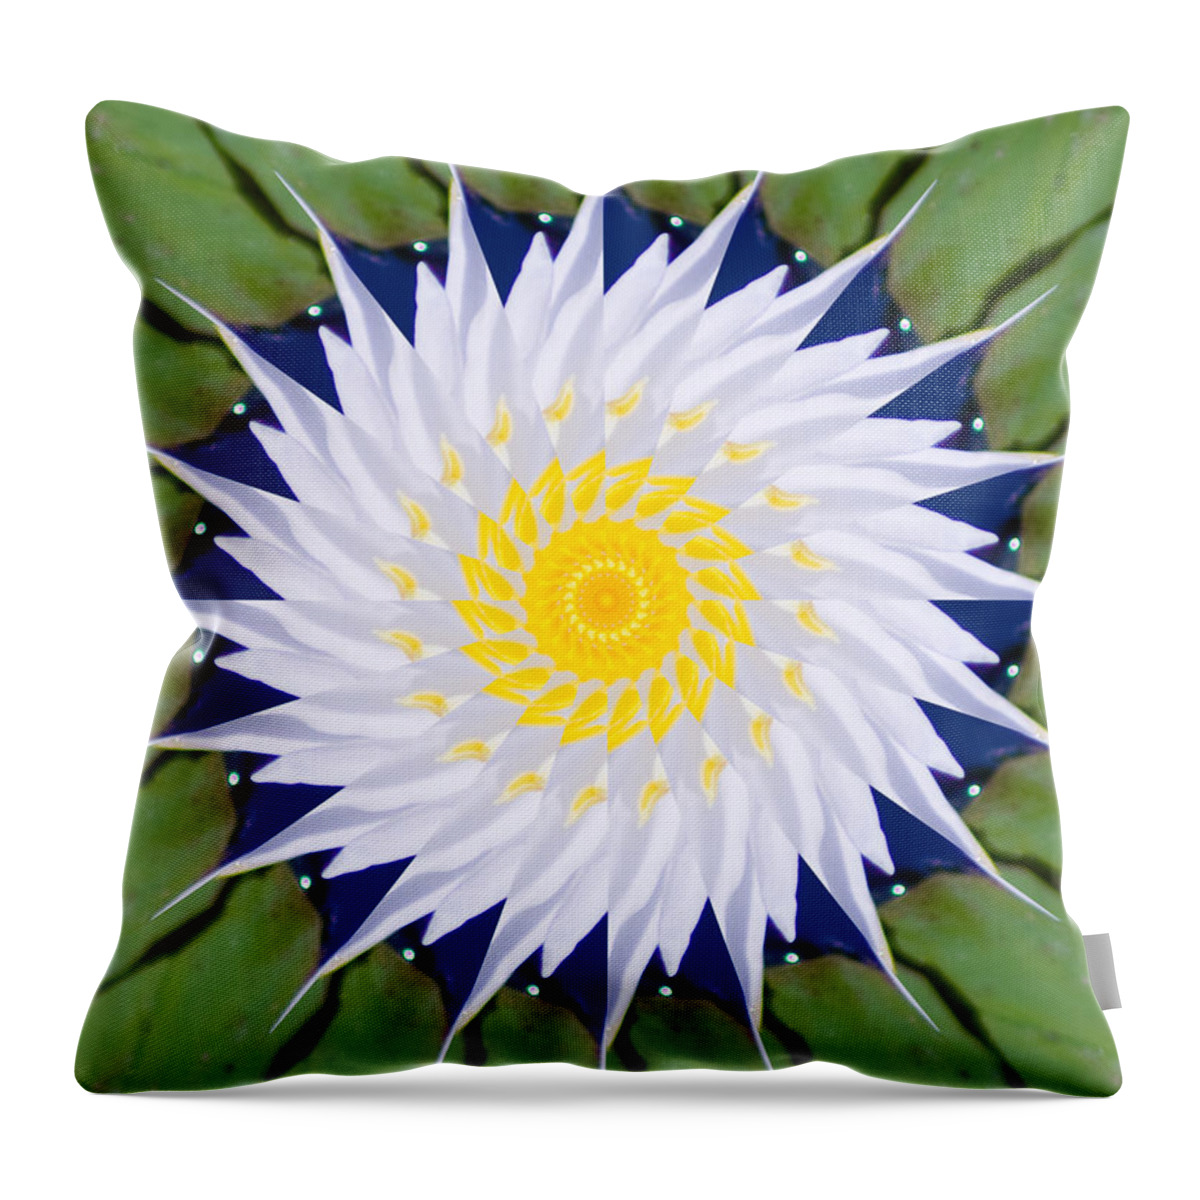 Water Throw Pillow featuring the photograph Water Lily Kaleidoscope by Bill Barber